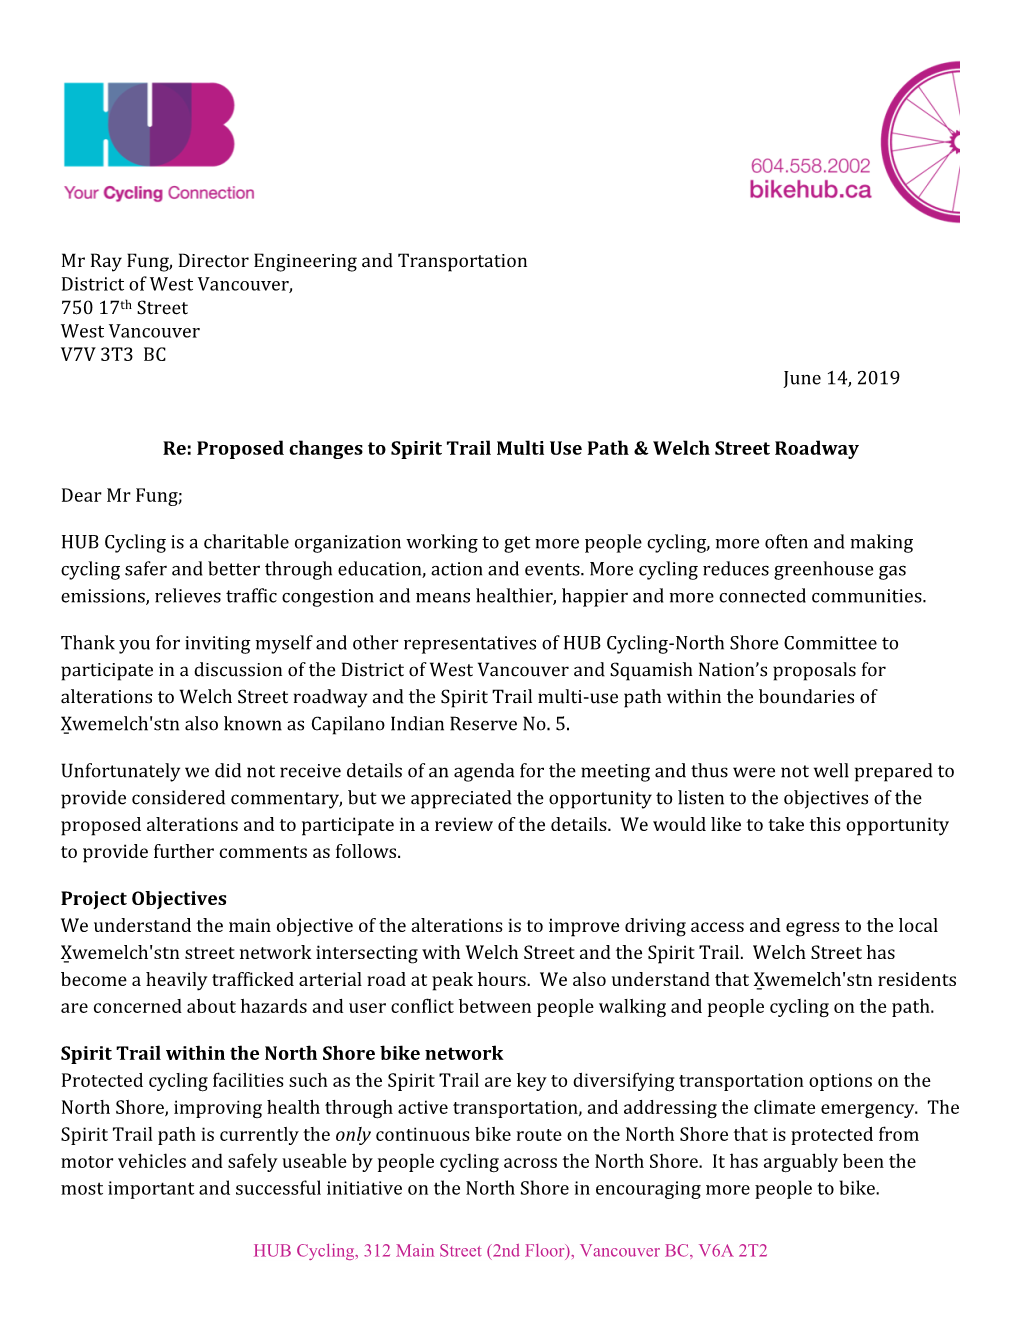 Mr Ray Fung, Director Engineering and Transportation District of West Vancouver, 750 17Th Street West Vancouver V7V 3T3 BC June 14, 2019